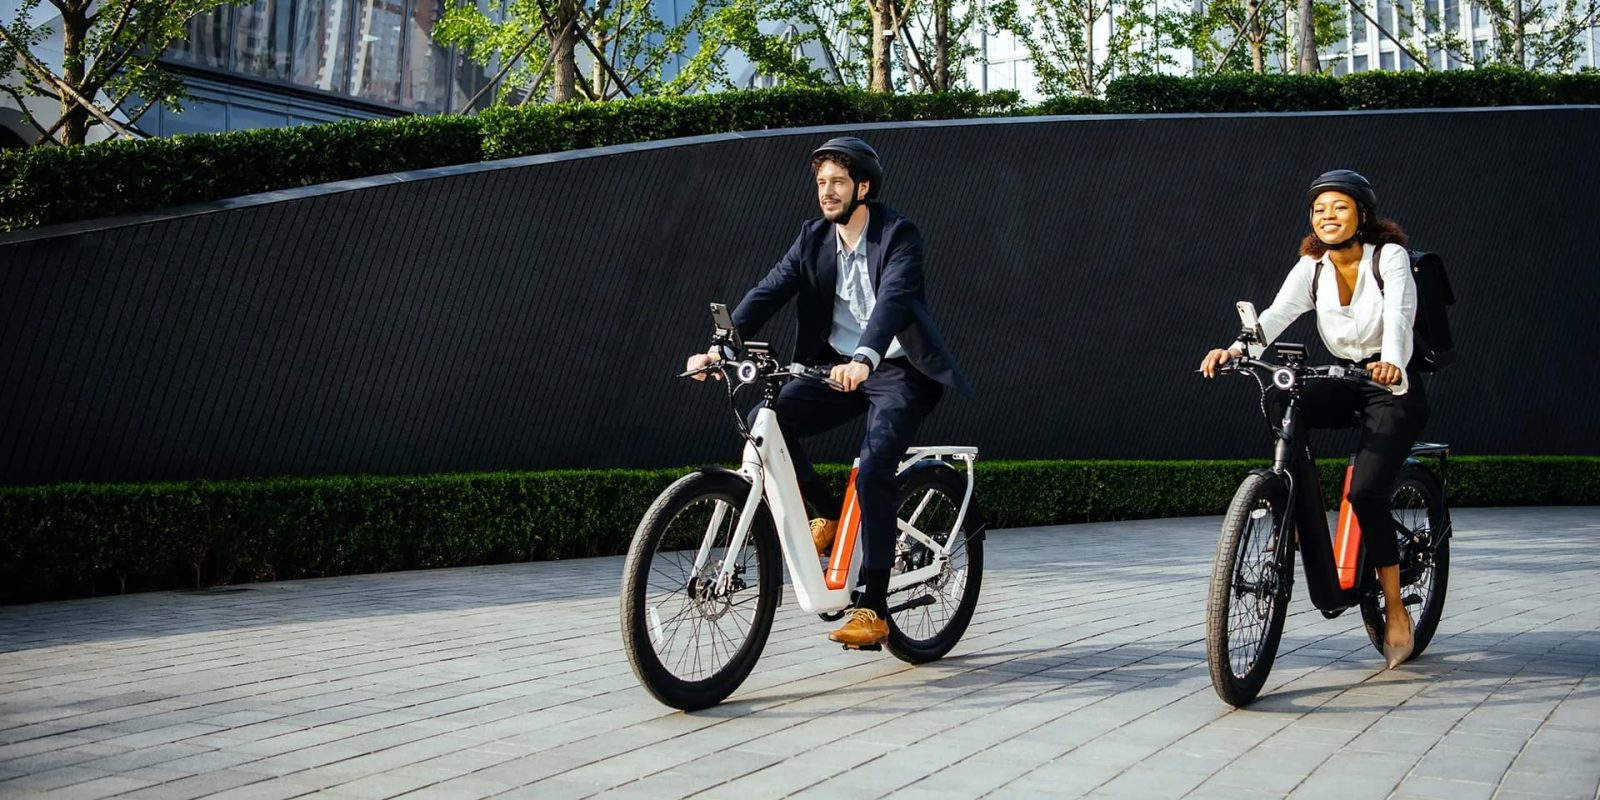 These were the top 5 biggest electric bike news stories of 2022